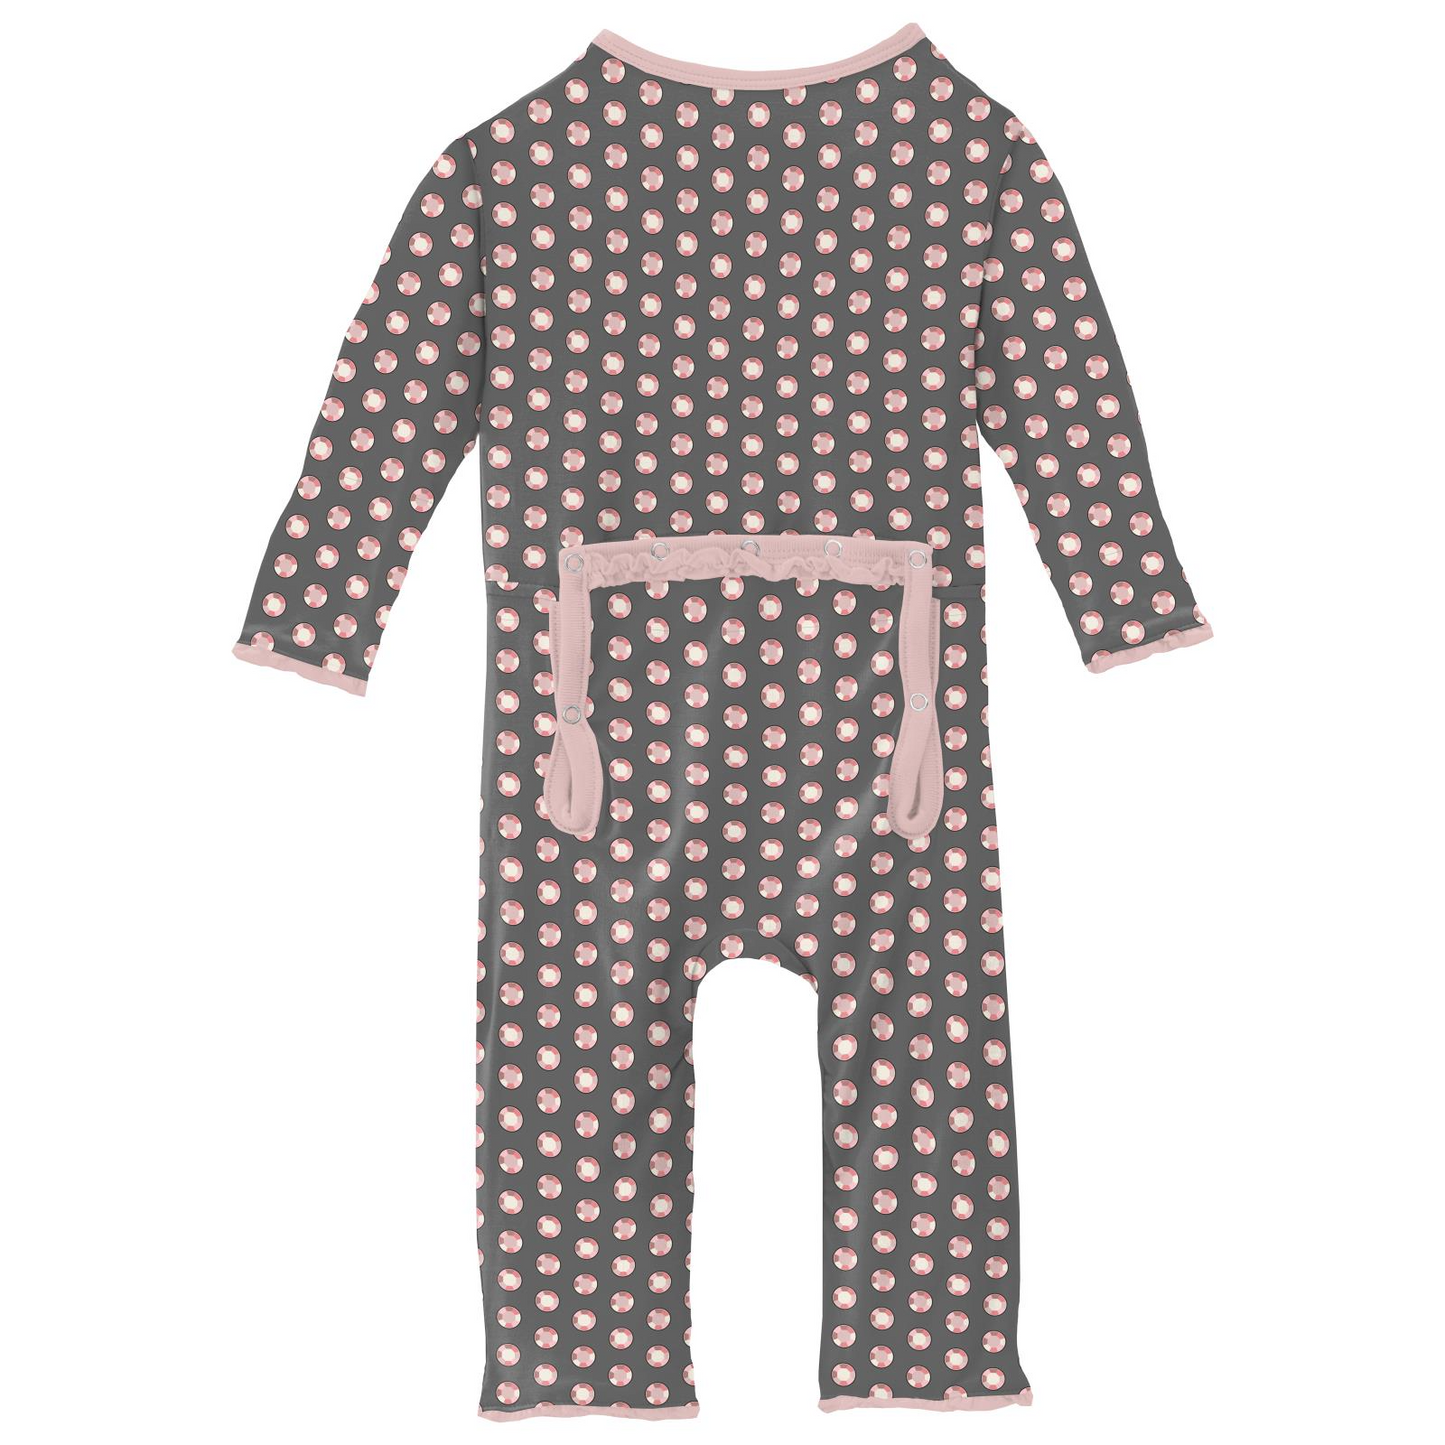 Kickee Pants Print Muffin Ruffle Coverall with 2 Way Zipper: Pewter Sparkle